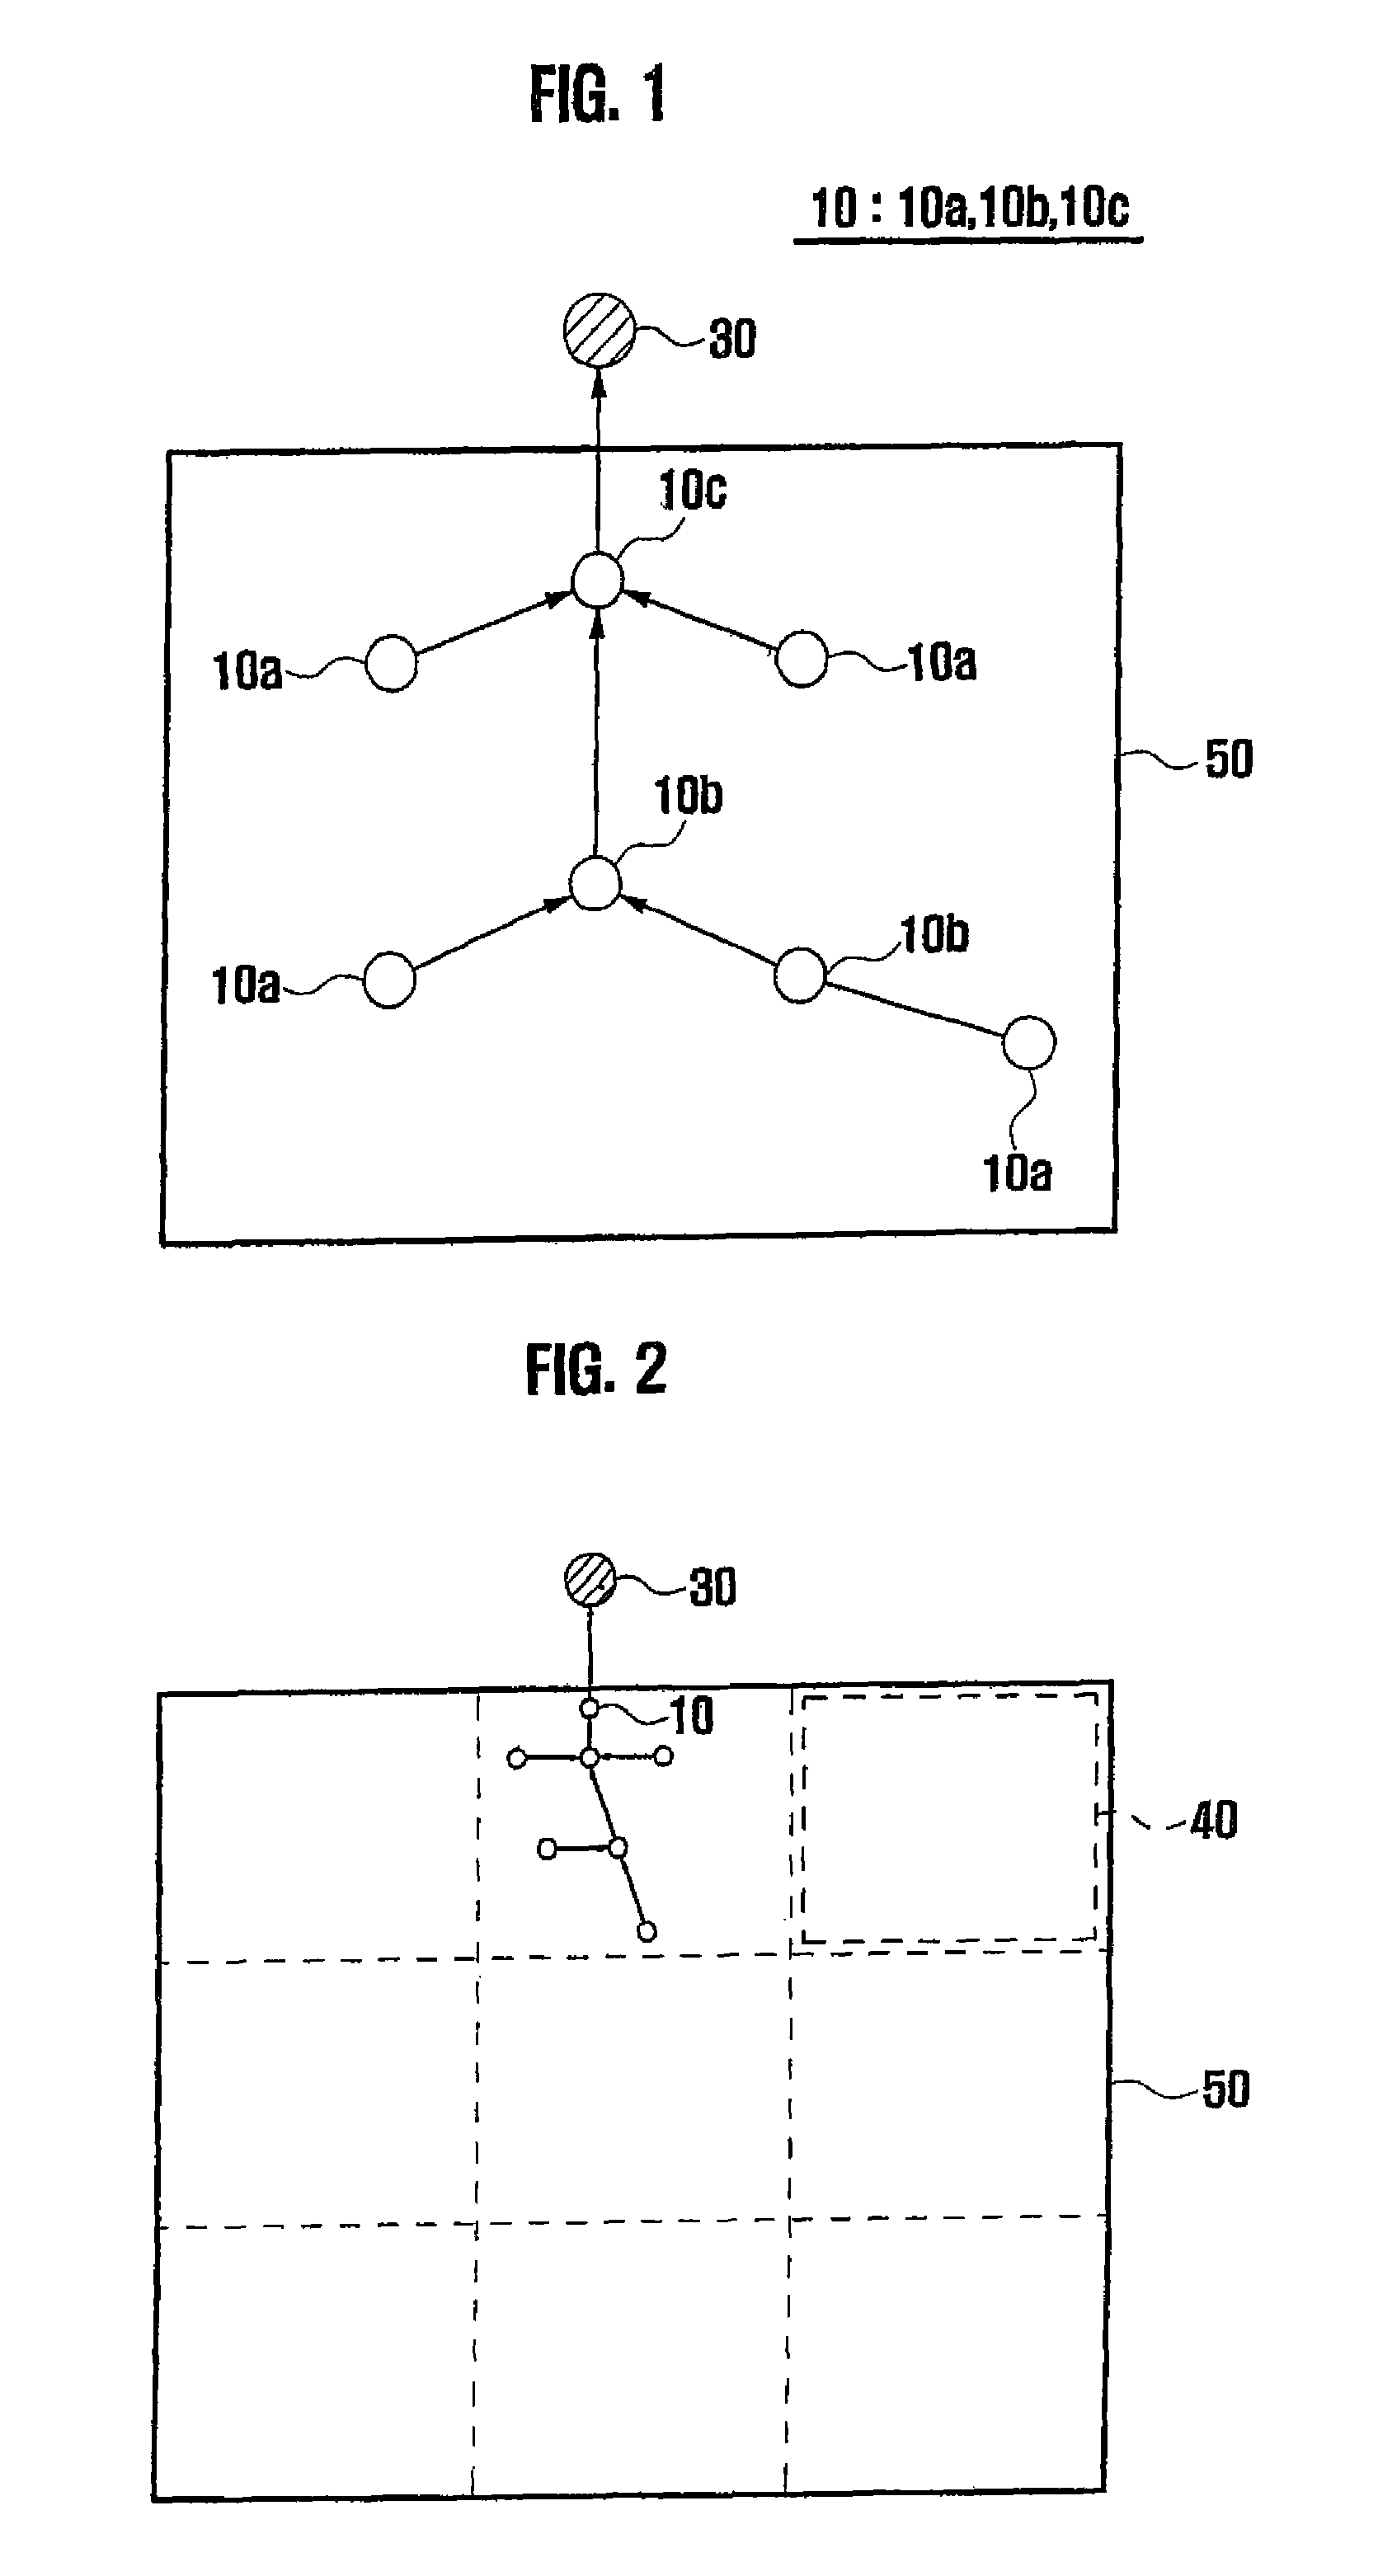 Method and system for managing energy in sensor network environment using spanning tree